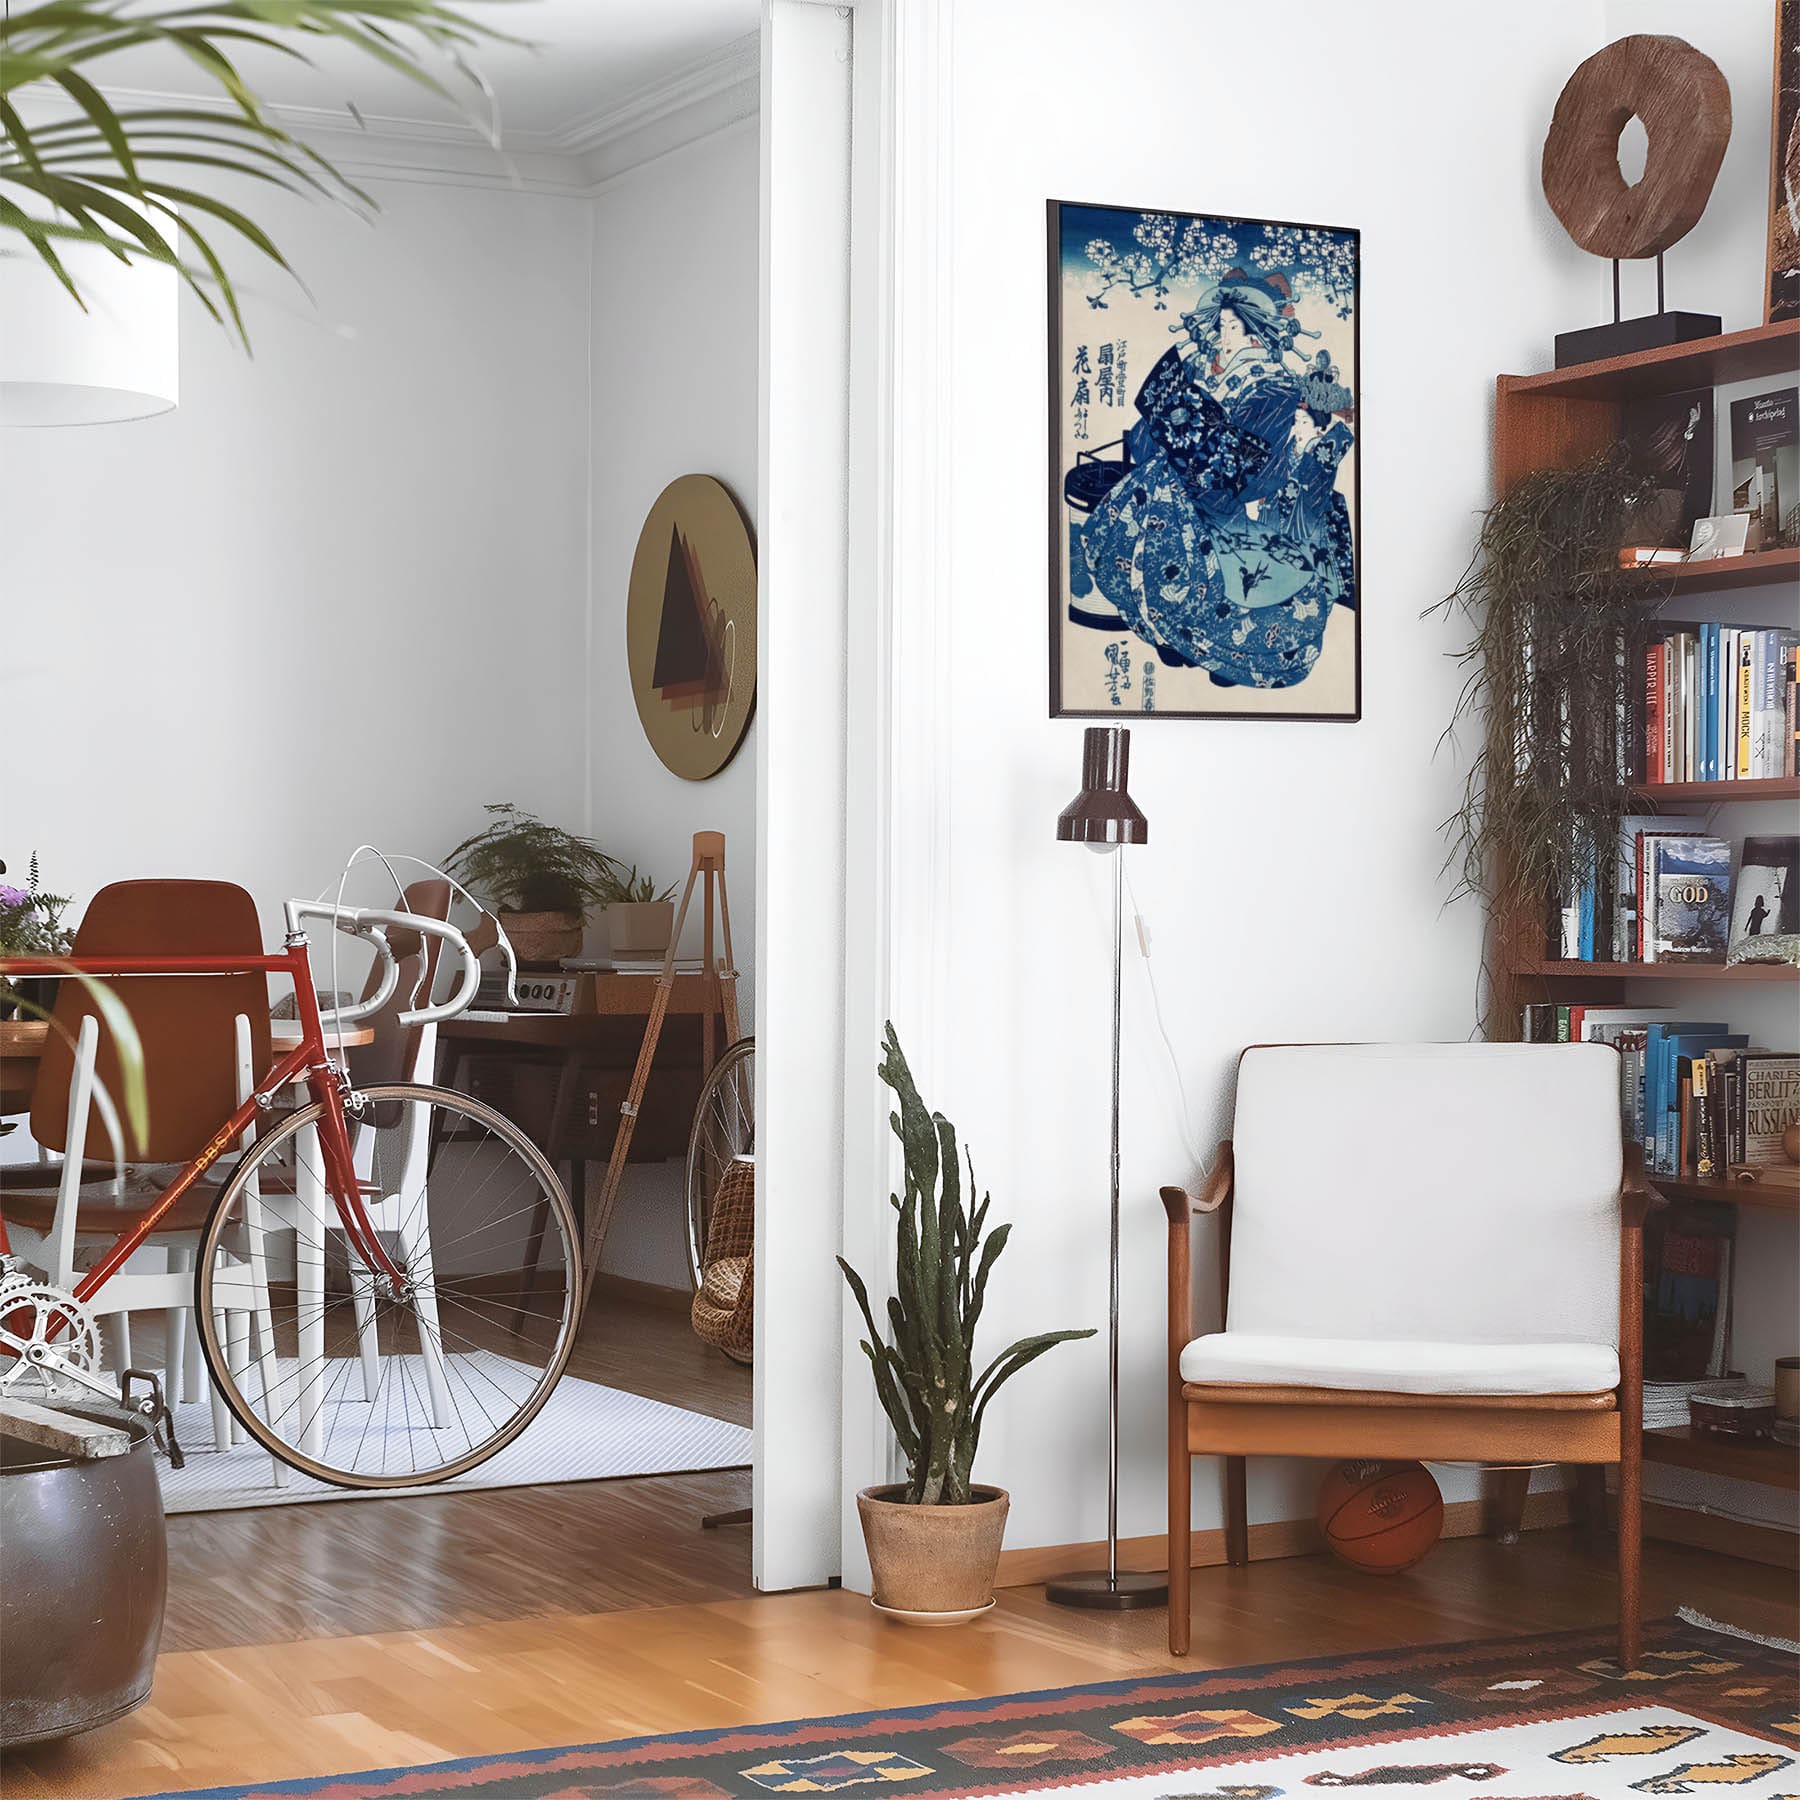 Eclectic living room with a road bike, bookshelf and house plants that features framed artwork of a Geisha in a Blue Kimono above a chair and lamp